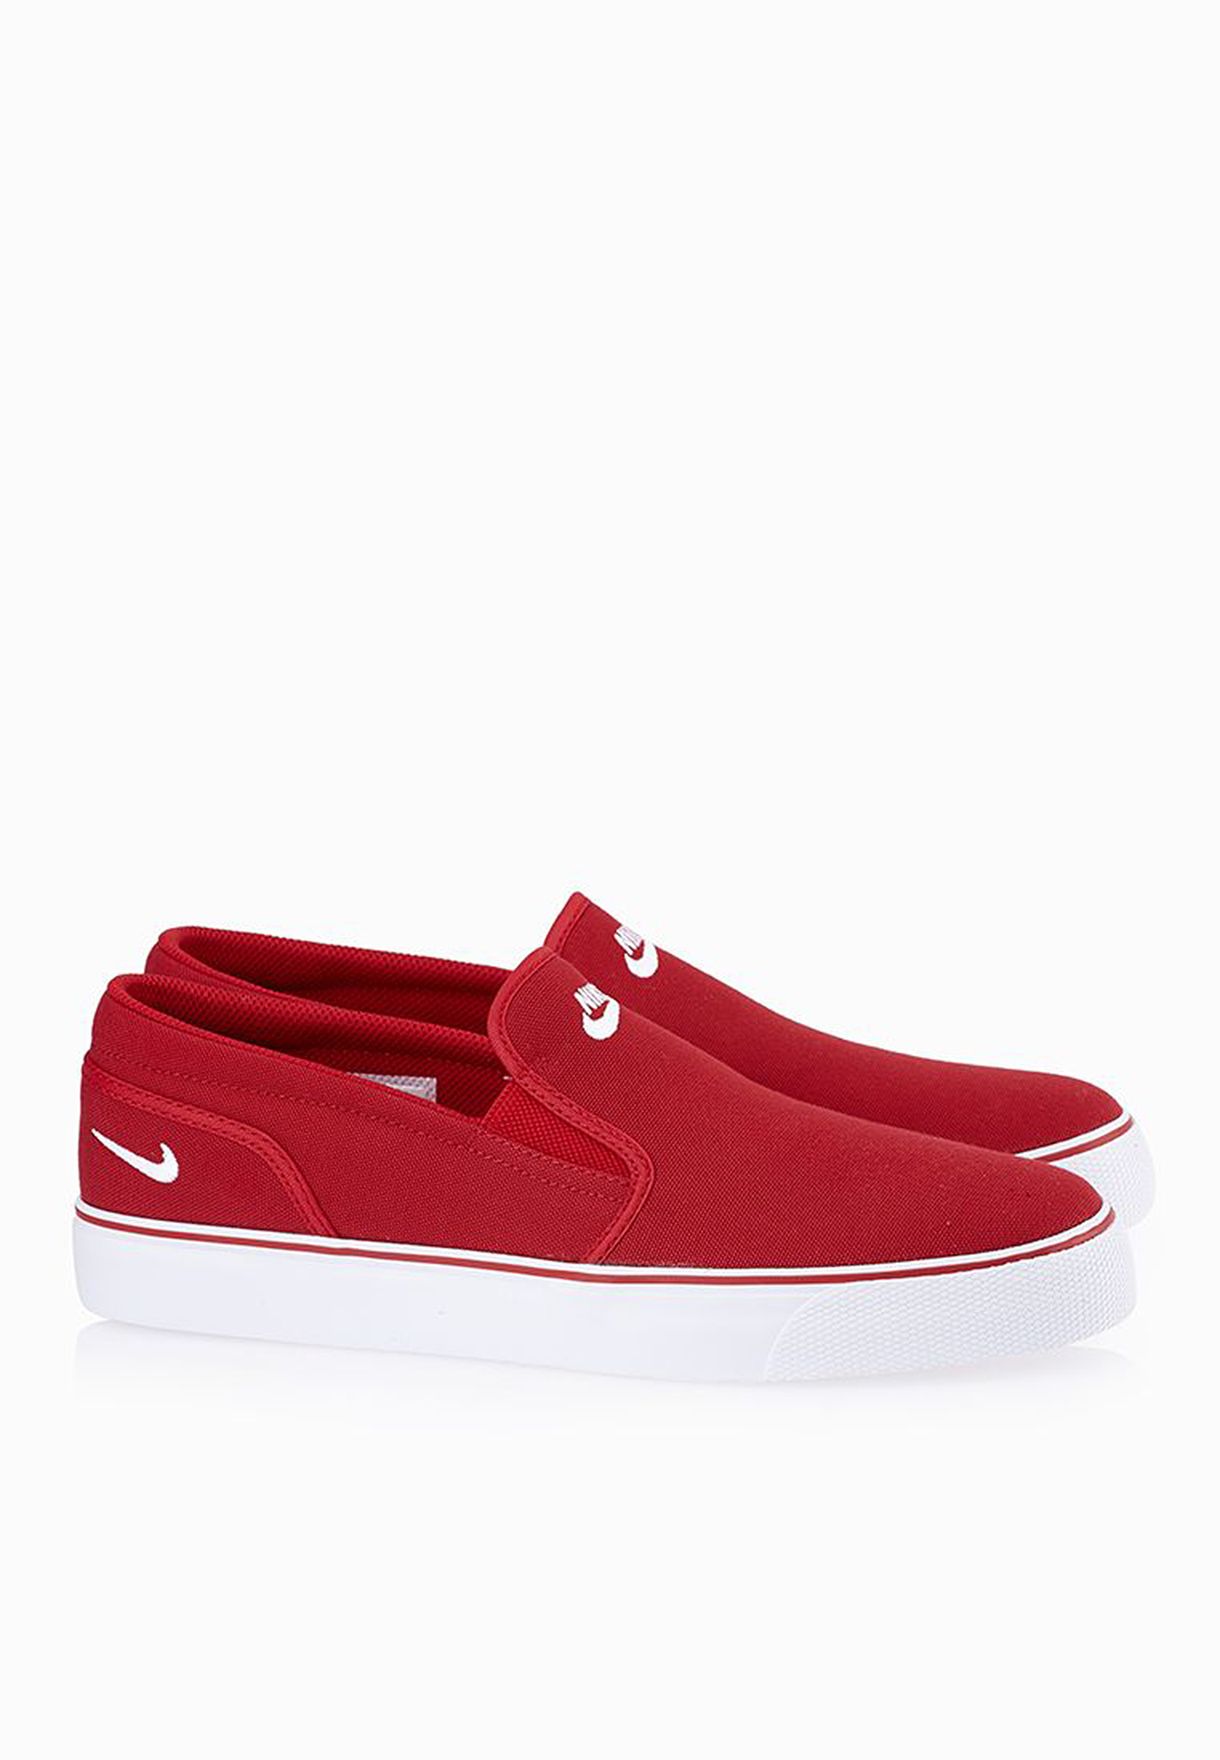 red slip on shoes